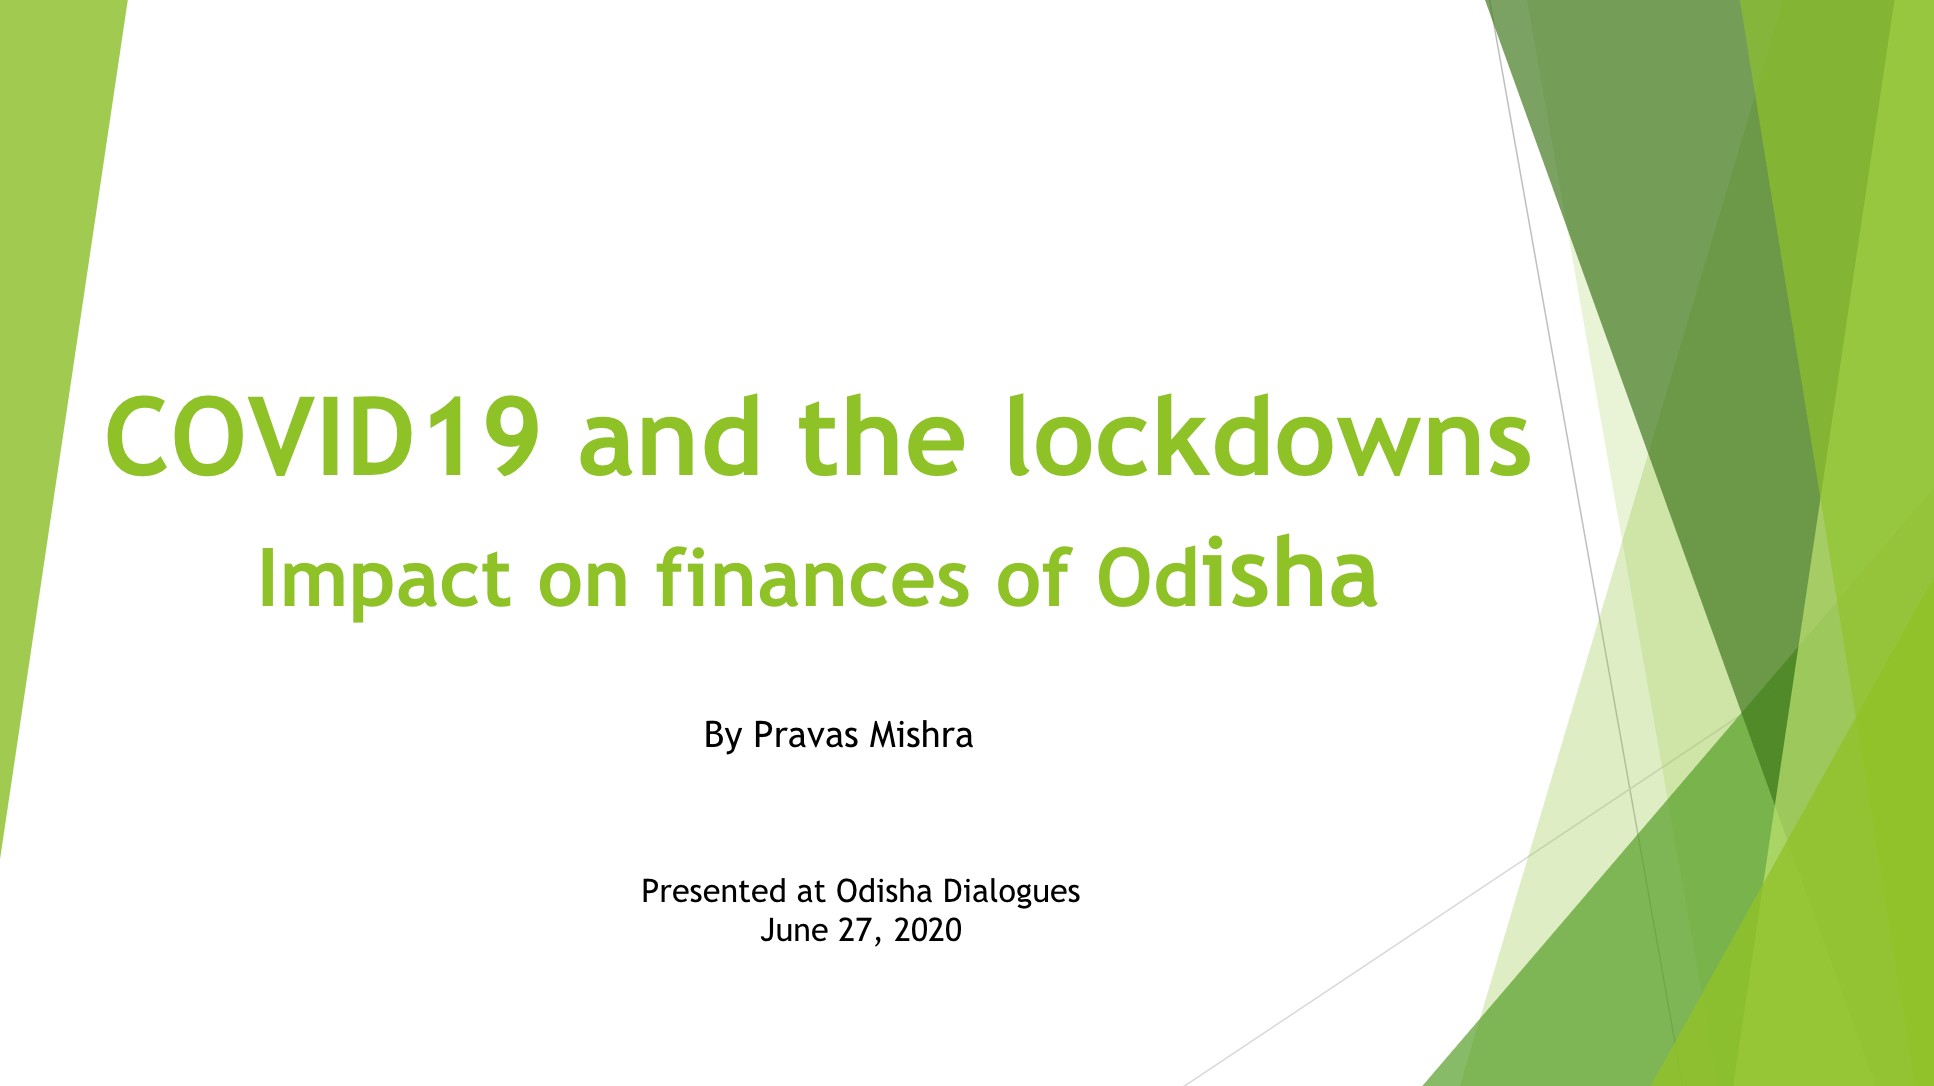 COVID-19 and the Lockdowns by Pravas Mishra, Public Finance Analyst at Oxfam India